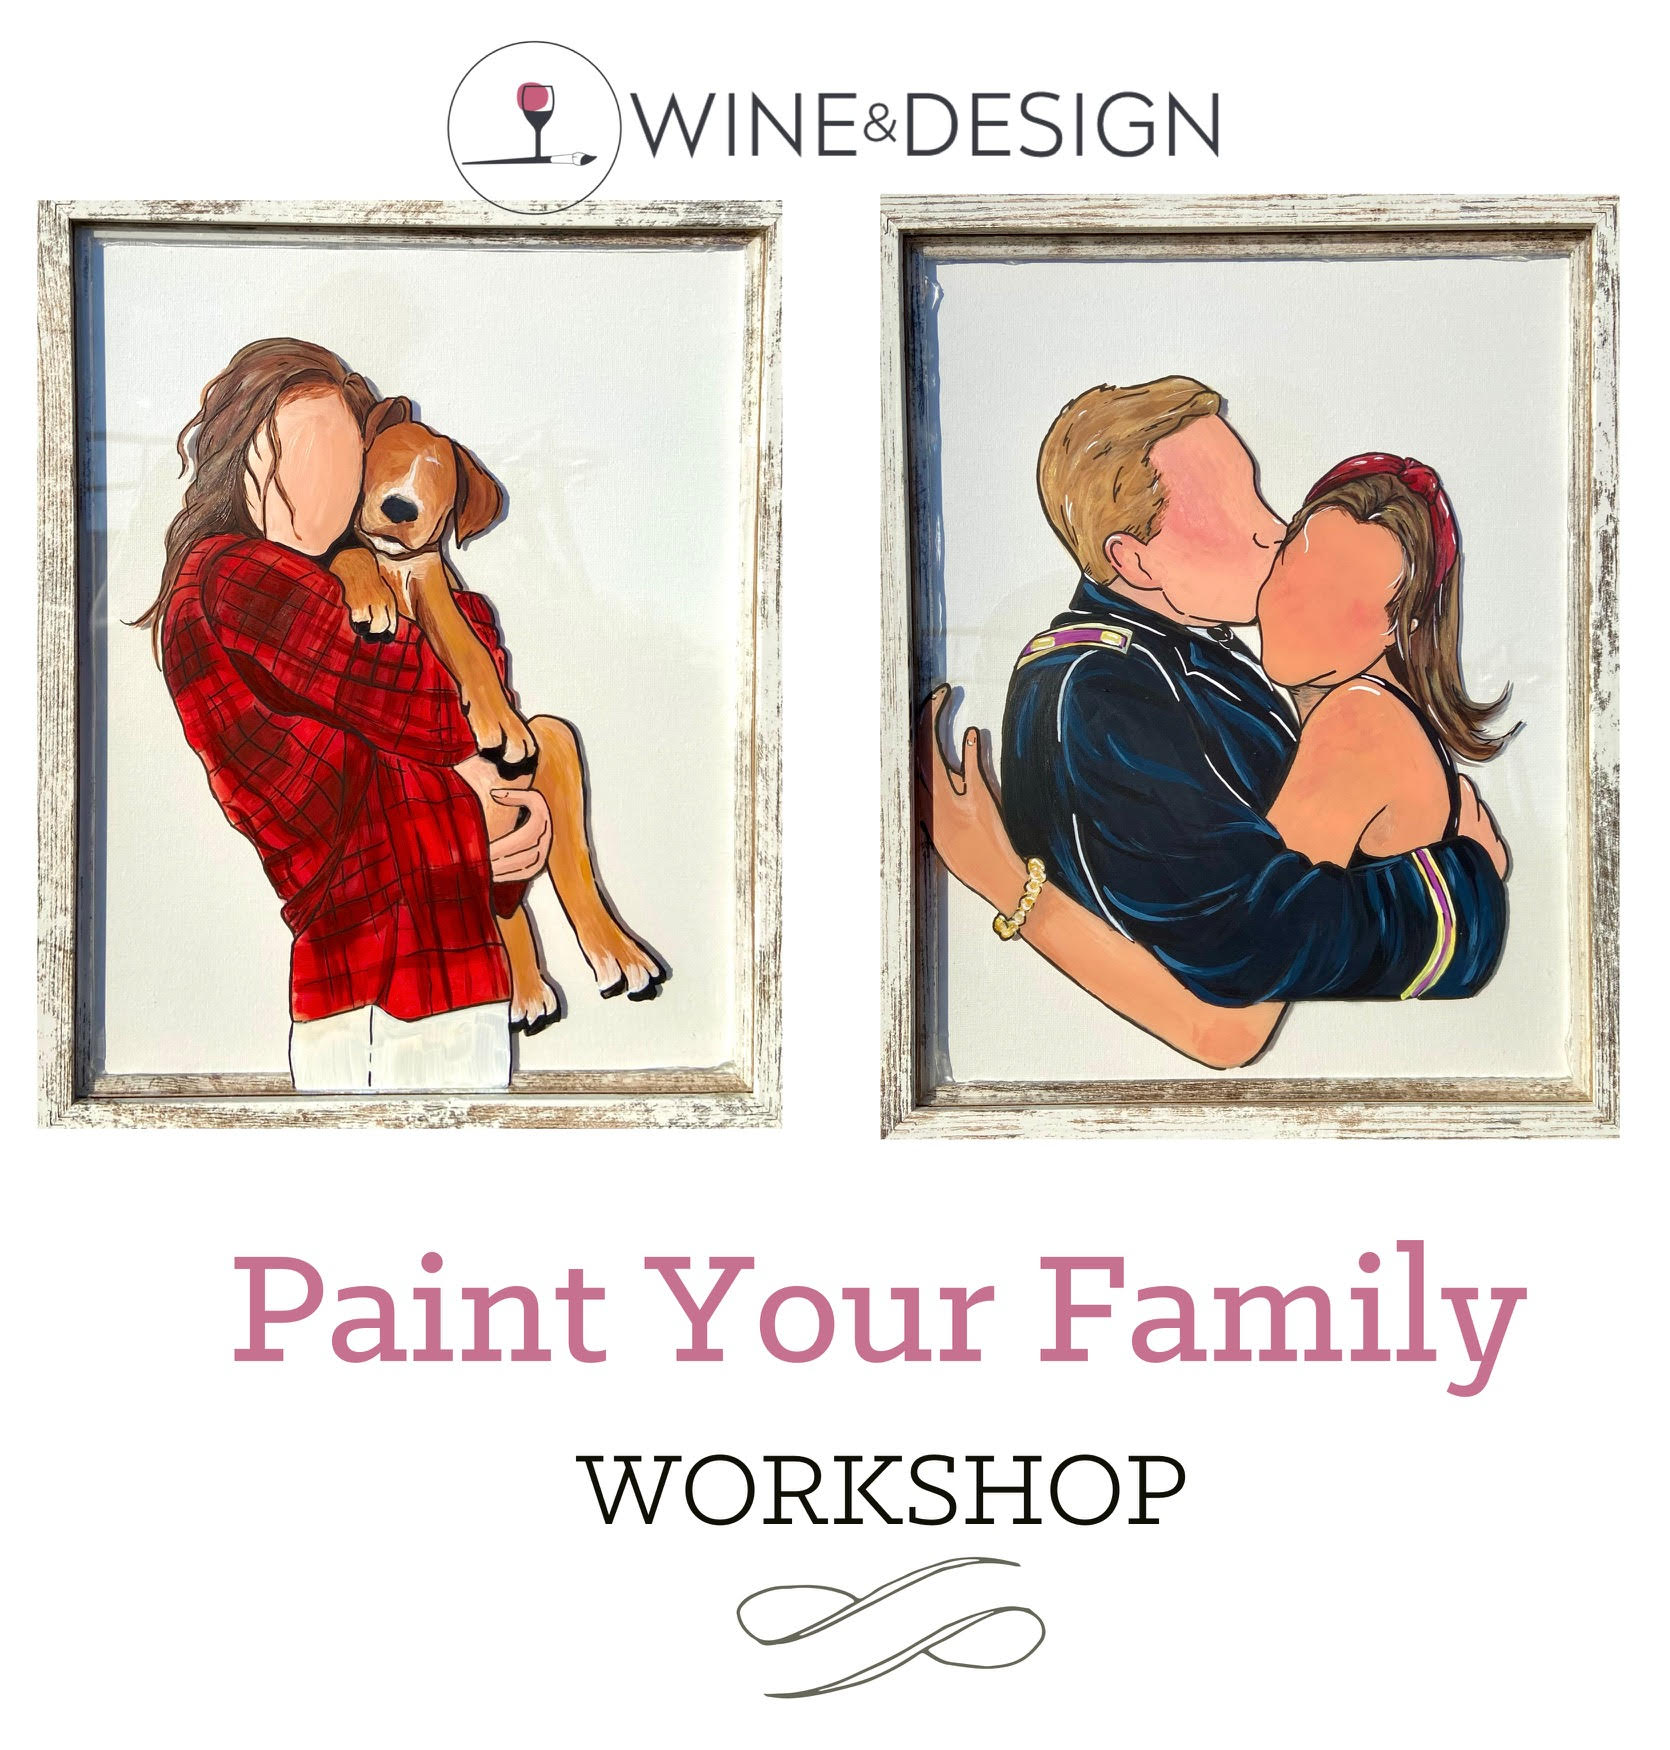  'Paint Your Family in Resin' Workshop! Email us your photo 4 days before class!